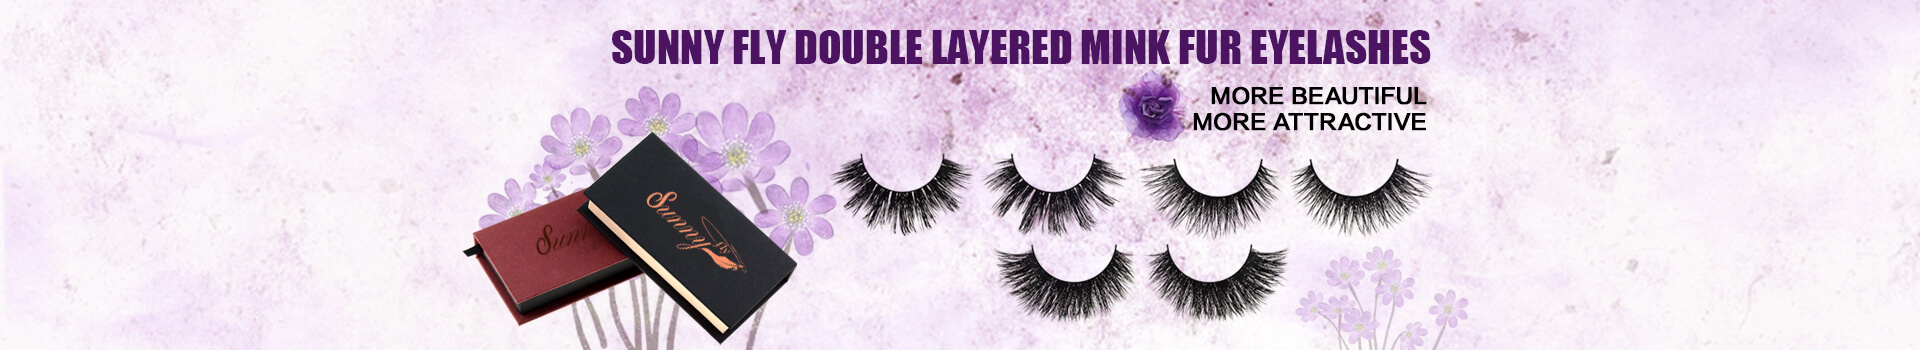 Double Layered Nerz Wimpern MD04